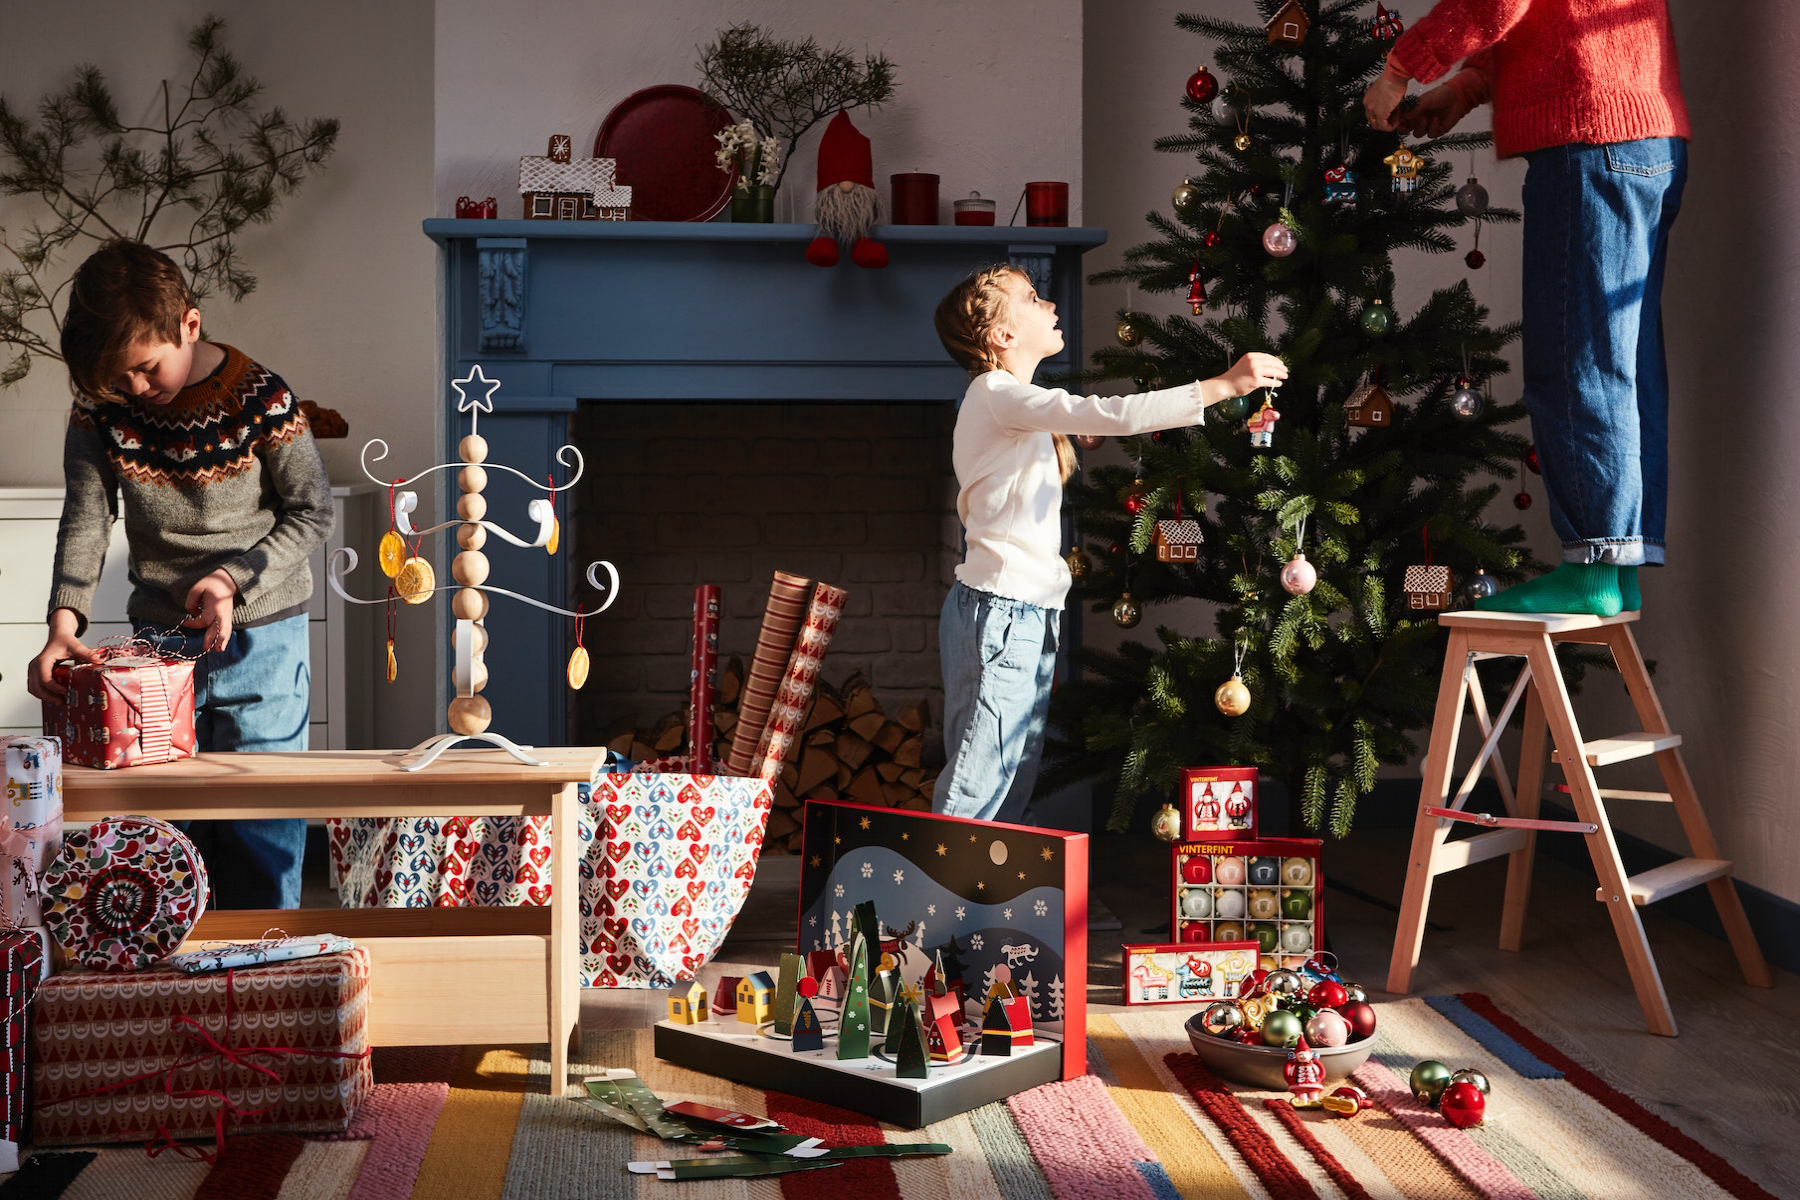 IKEA - Fill your home with Christmas cheer that suits your style